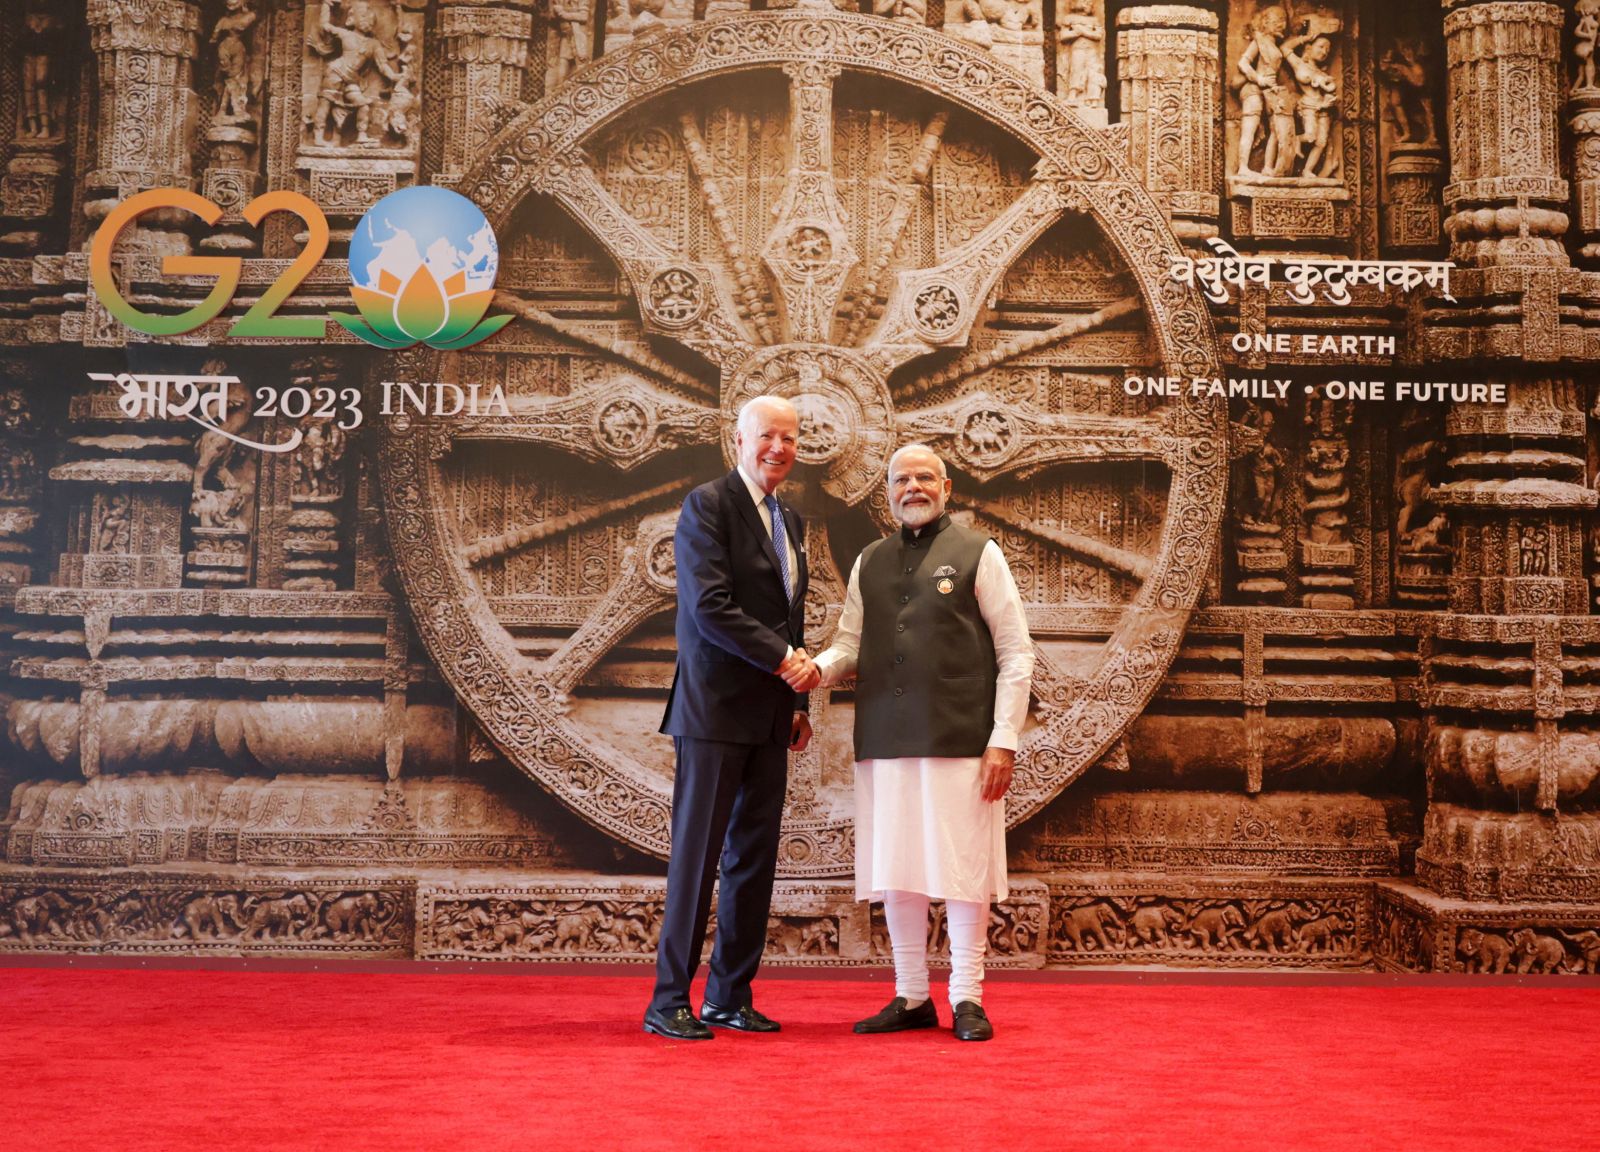 epa10849949 A handout photo made available by the Indian Press Information Bureau (PIB) shows Indian Prime Minister Narendra Modi (R) welcoming US President Joe Biden for the G20 Summit at Bharat Mandapam at ITPO Convention Centre Pragati Maidan in New Delhi, India, 09 September 2023. The G20 Heads of State and Government summit takes place in the Indian capital on 09 and 10 September.  EPA/INDIAN PRESS INFORMATION BUREAU / HANDOUT  HANDOUT EDITORIAL USE ONLY/NO SALES